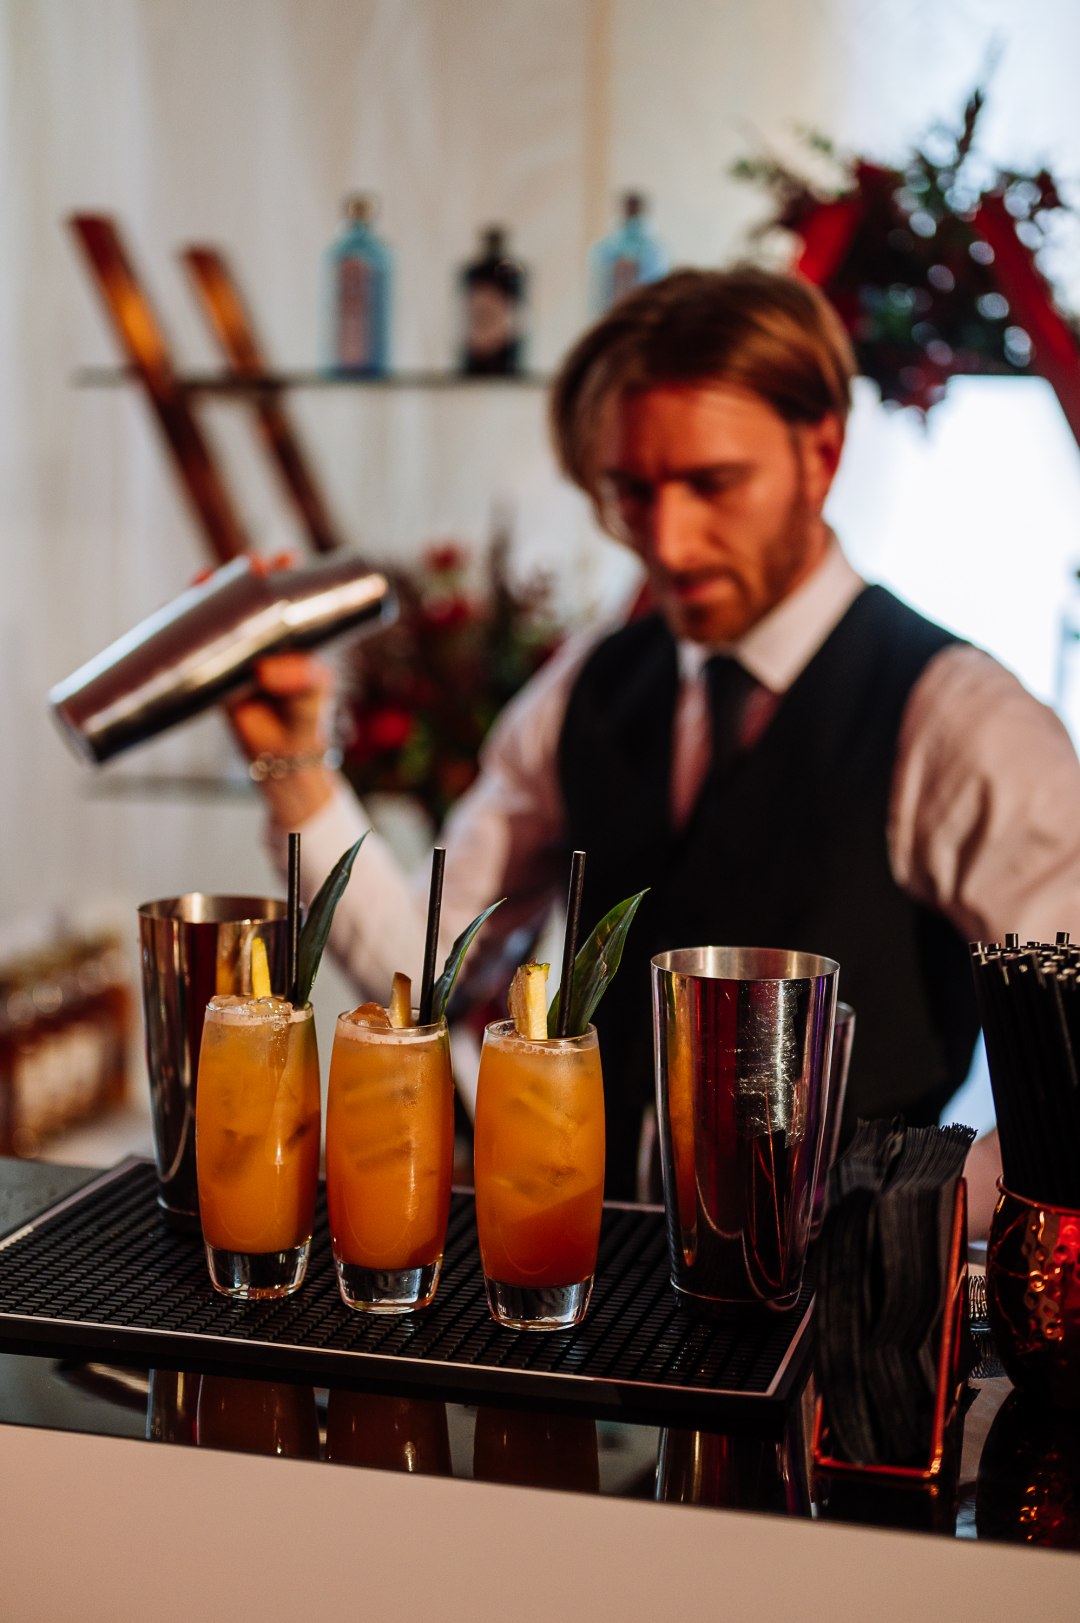 The Bespoke Mobile Bar company that comes to you